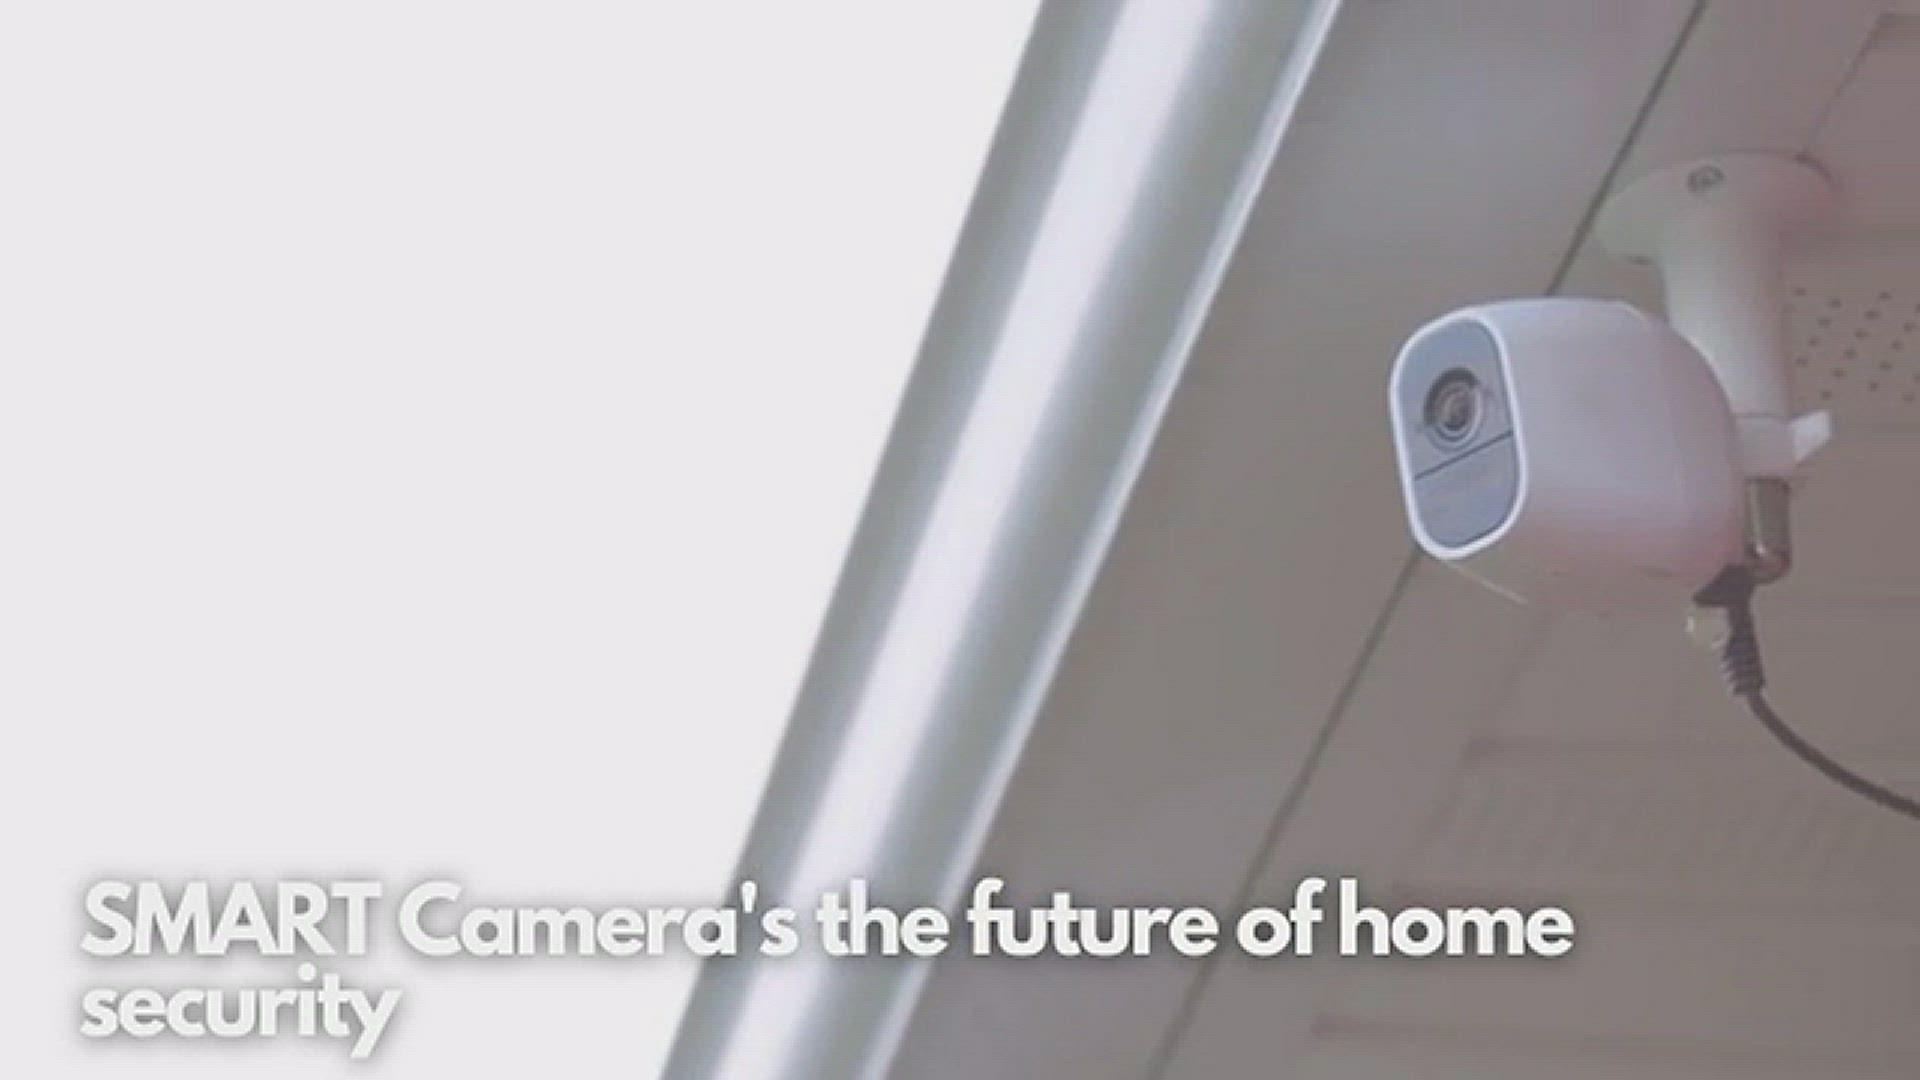 'Video thumbnail for SMART Cameras for Home Security'